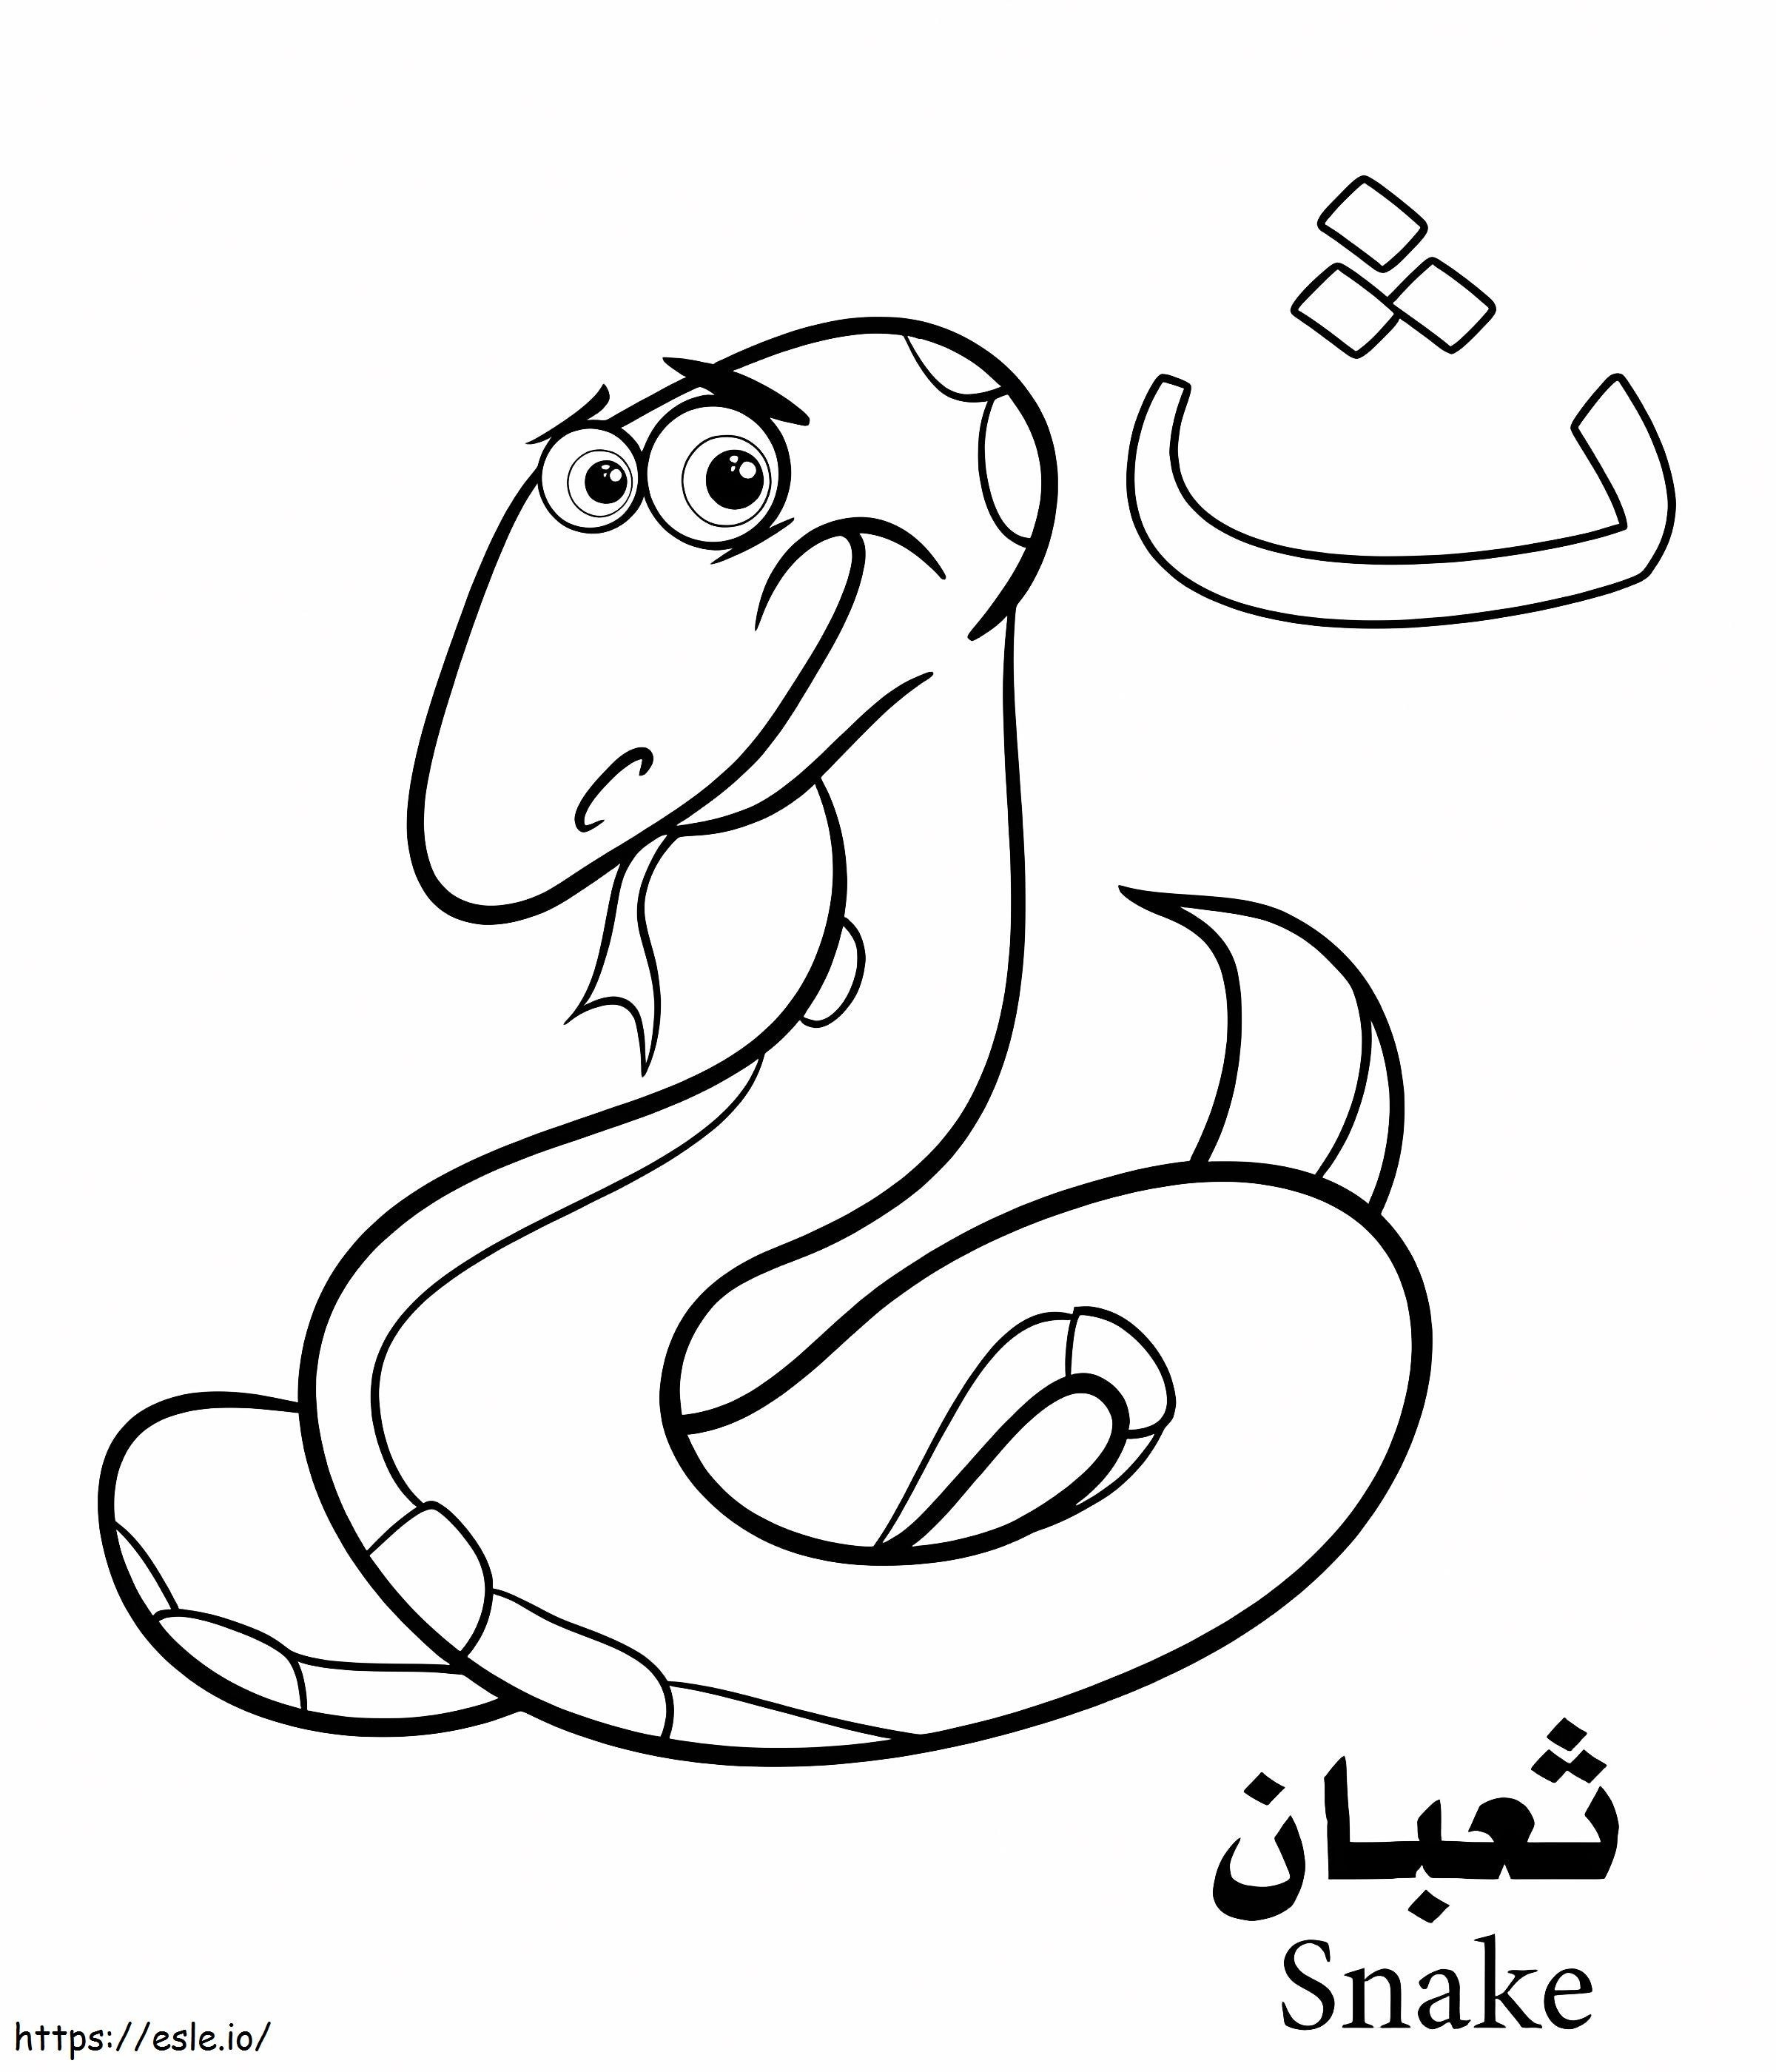 Snake Arabic Alphabet coloring page